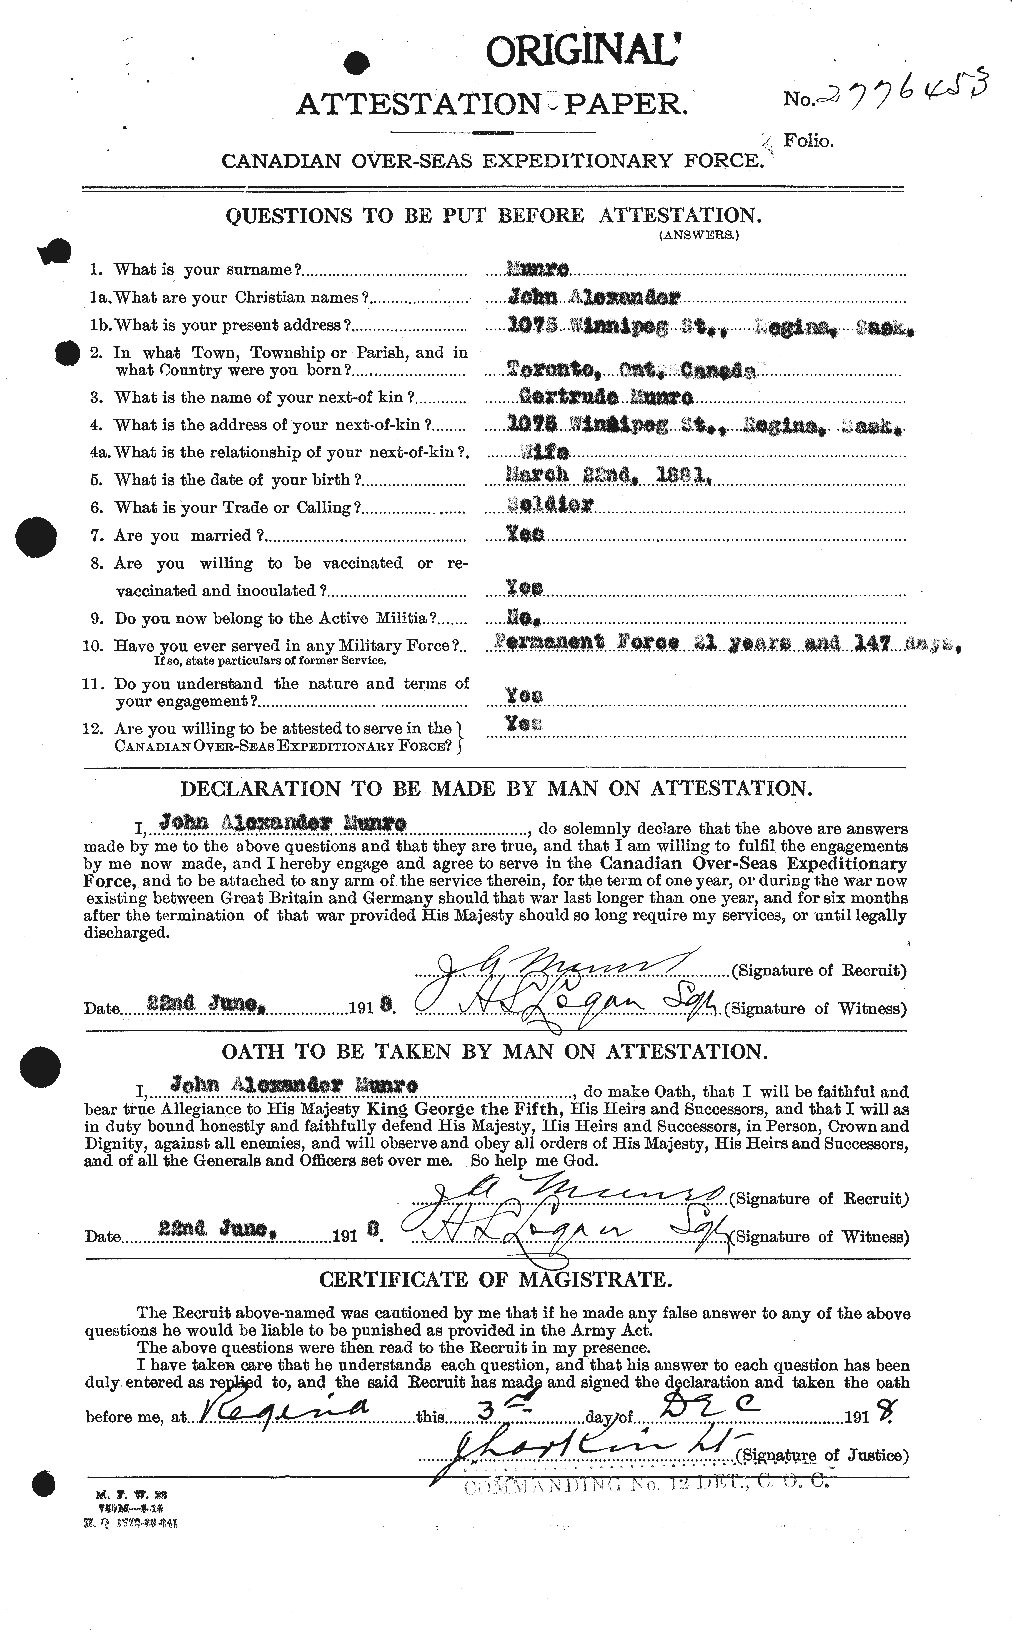 Personnel Records of the First World War - CEF 513950a